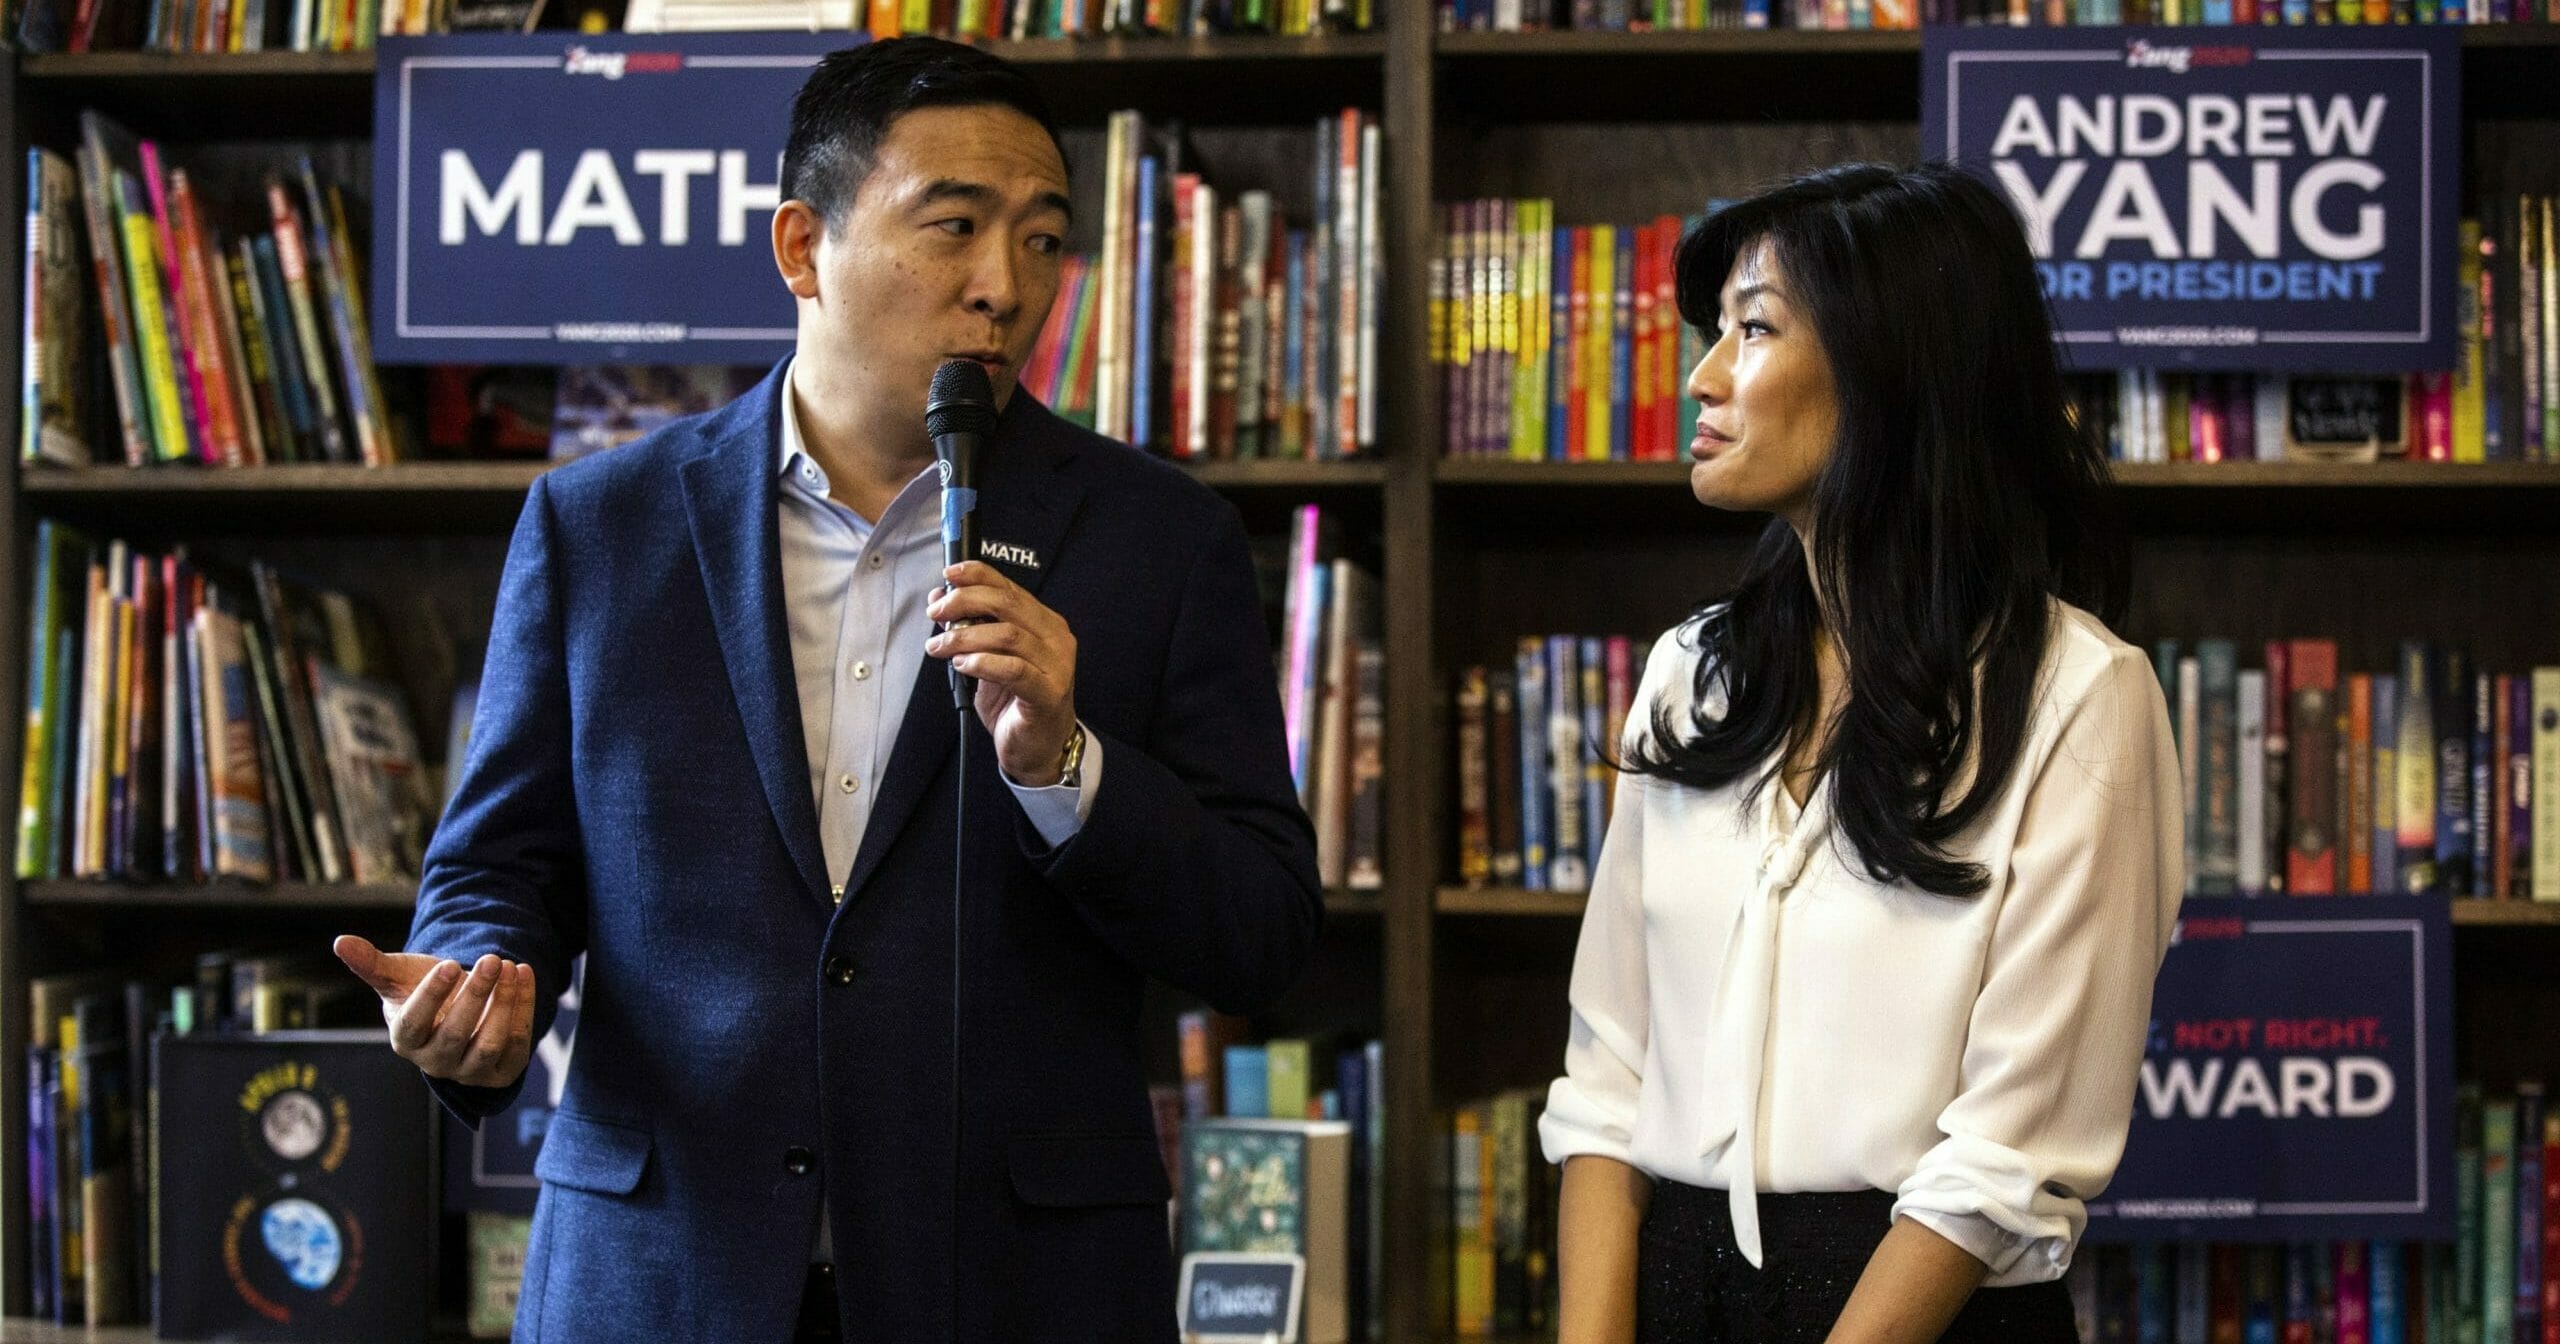 Democratic presidential candidate businessman Andrew Yang and his wife, Evelyn, speak during the "Family and Autism: An Honest Conversation" event at Sidekick Coffee & Books in Iowa City, Iowa, on Dec. 14, 2019.